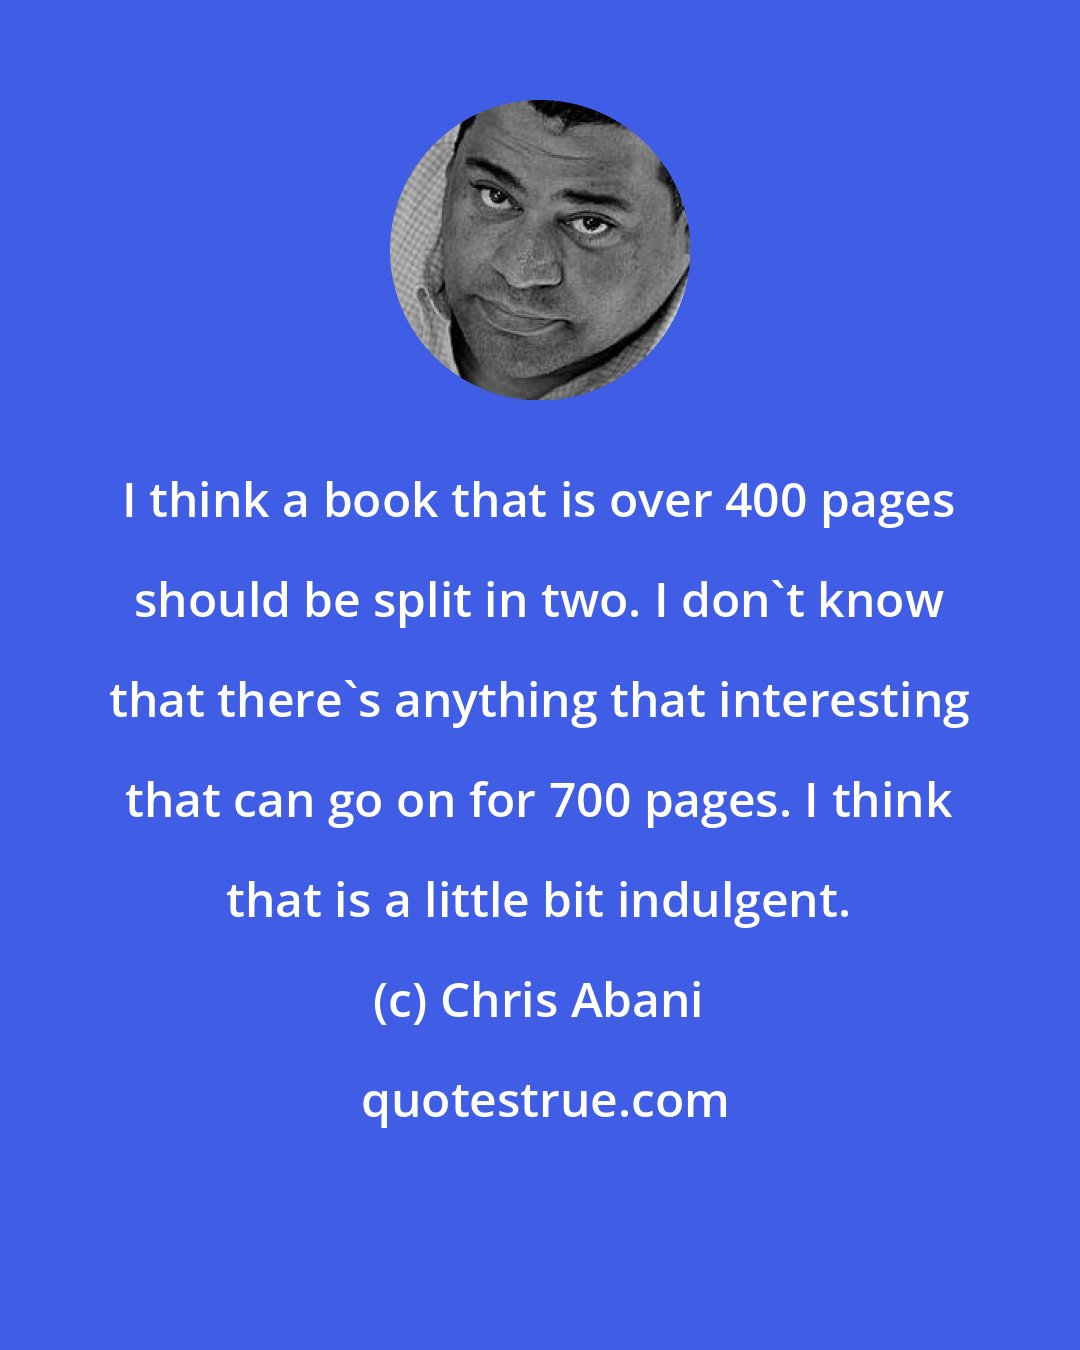 Chris Abani: I think a book that is over 400 pages should be split in two. I don't know that there's anything that interesting that can go on for 700 pages. I think that is a little bit indulgent.